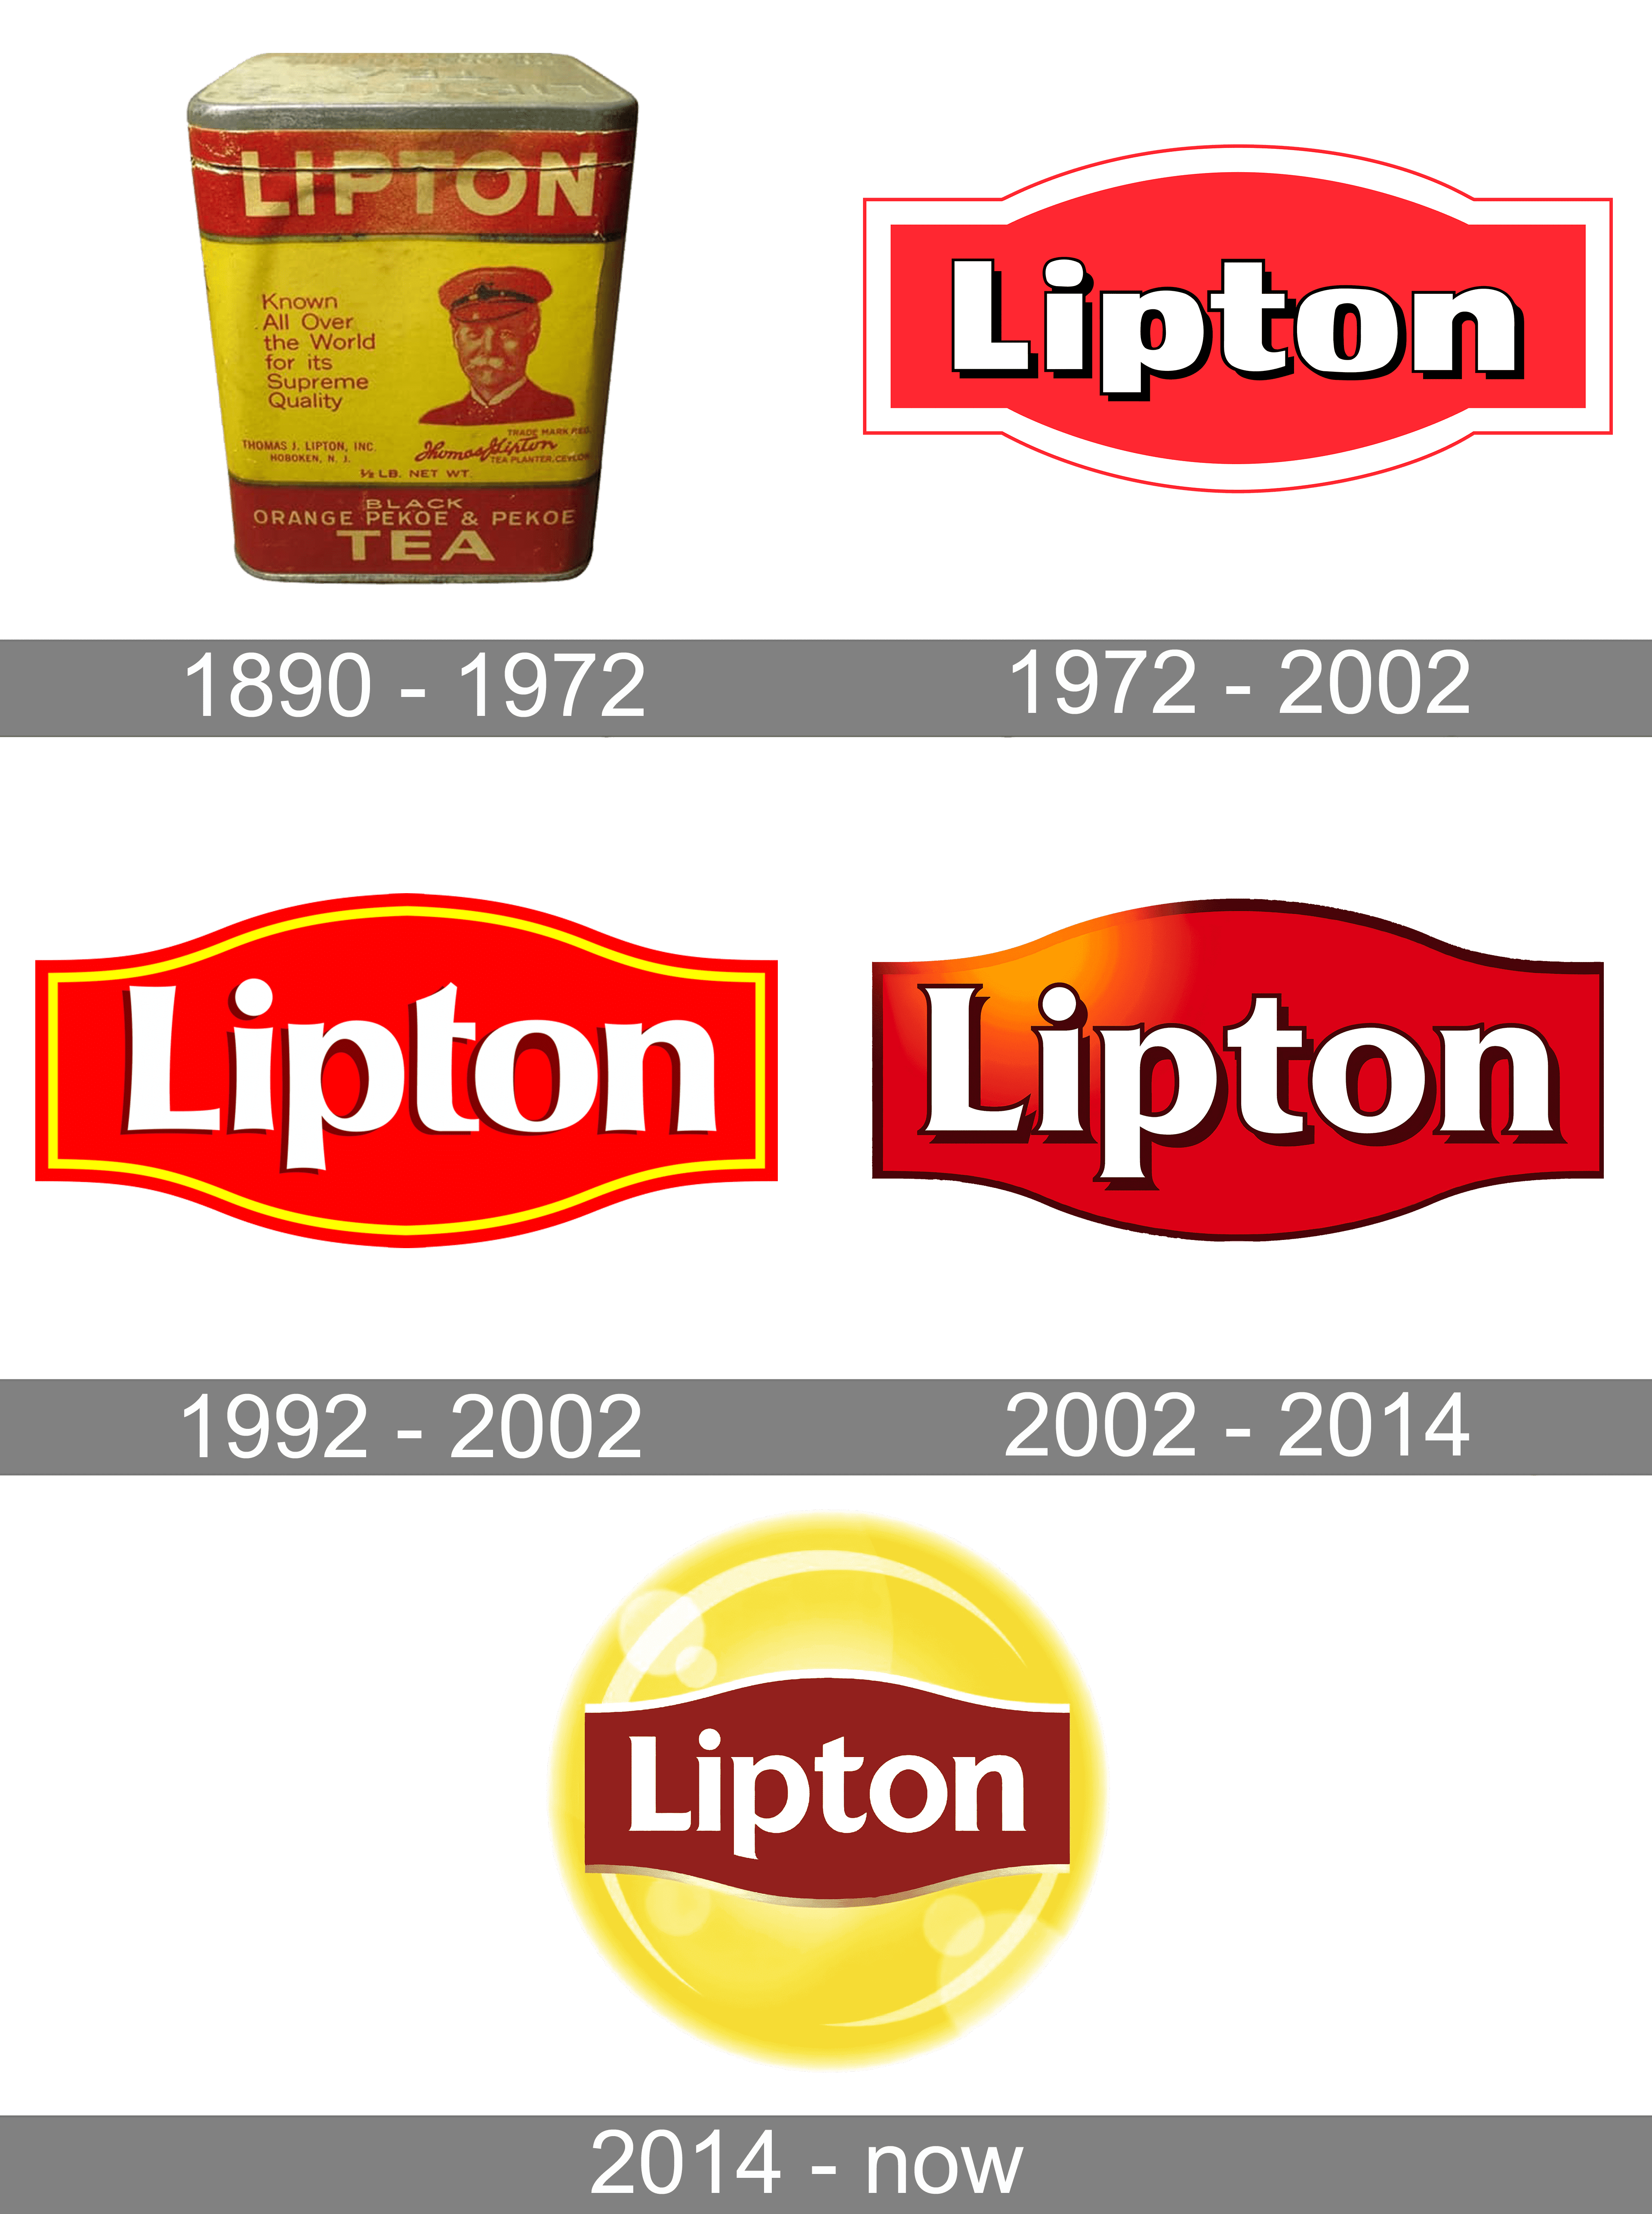 Lipton logo and symbol, meaning, history, PNG, brand